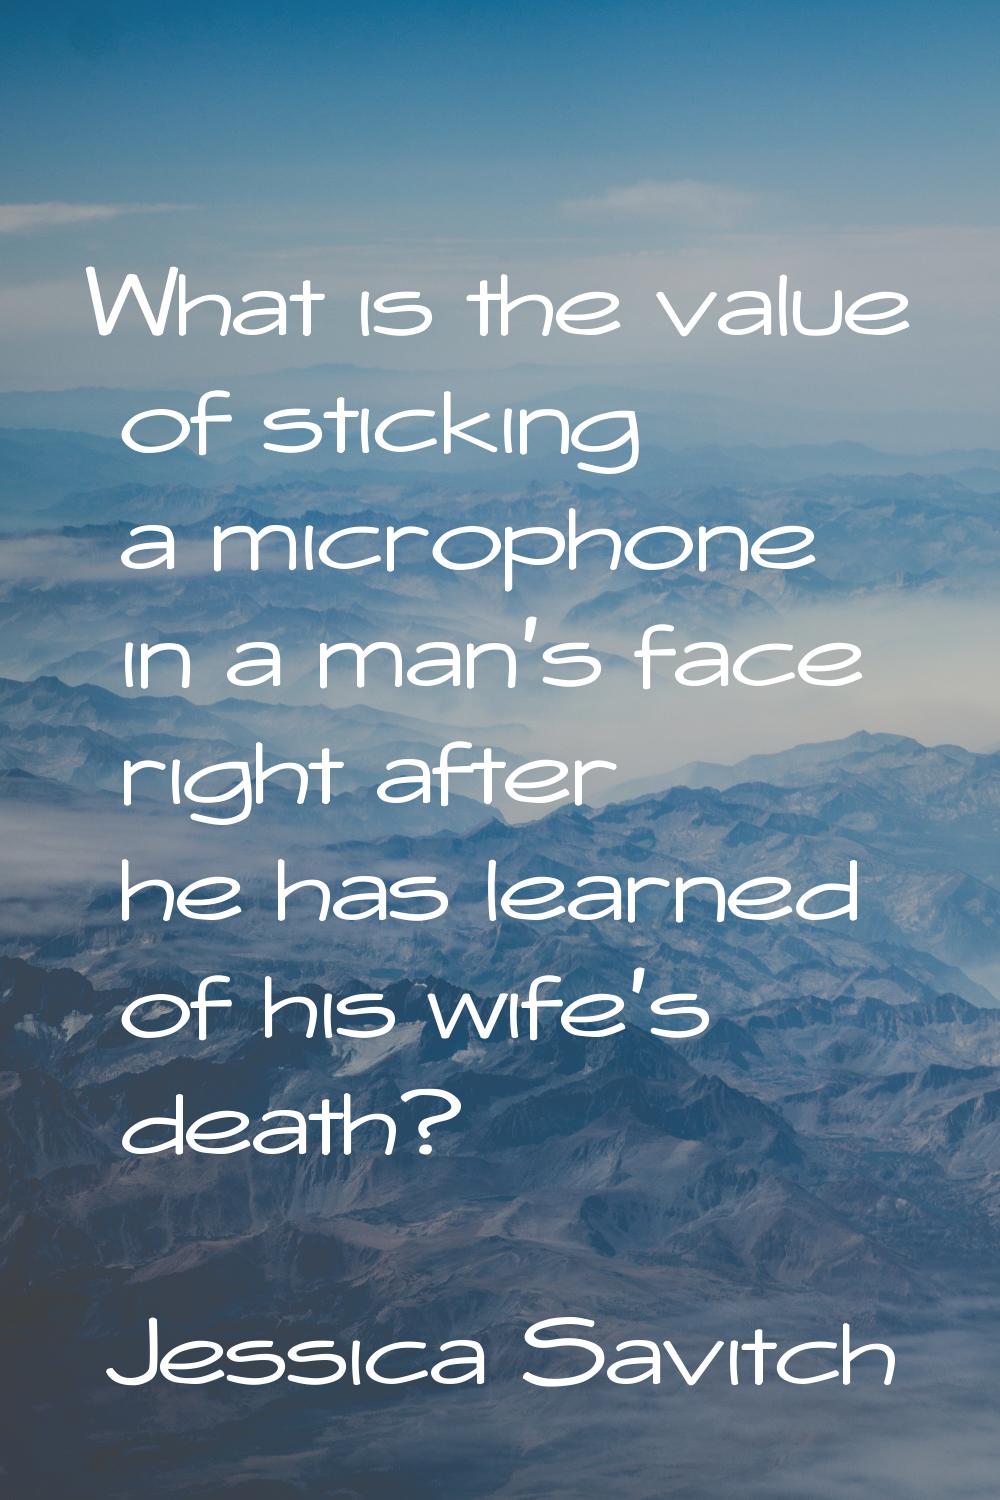 What is the value of sticking a microphone in a man's face right after he has learned of his wife's